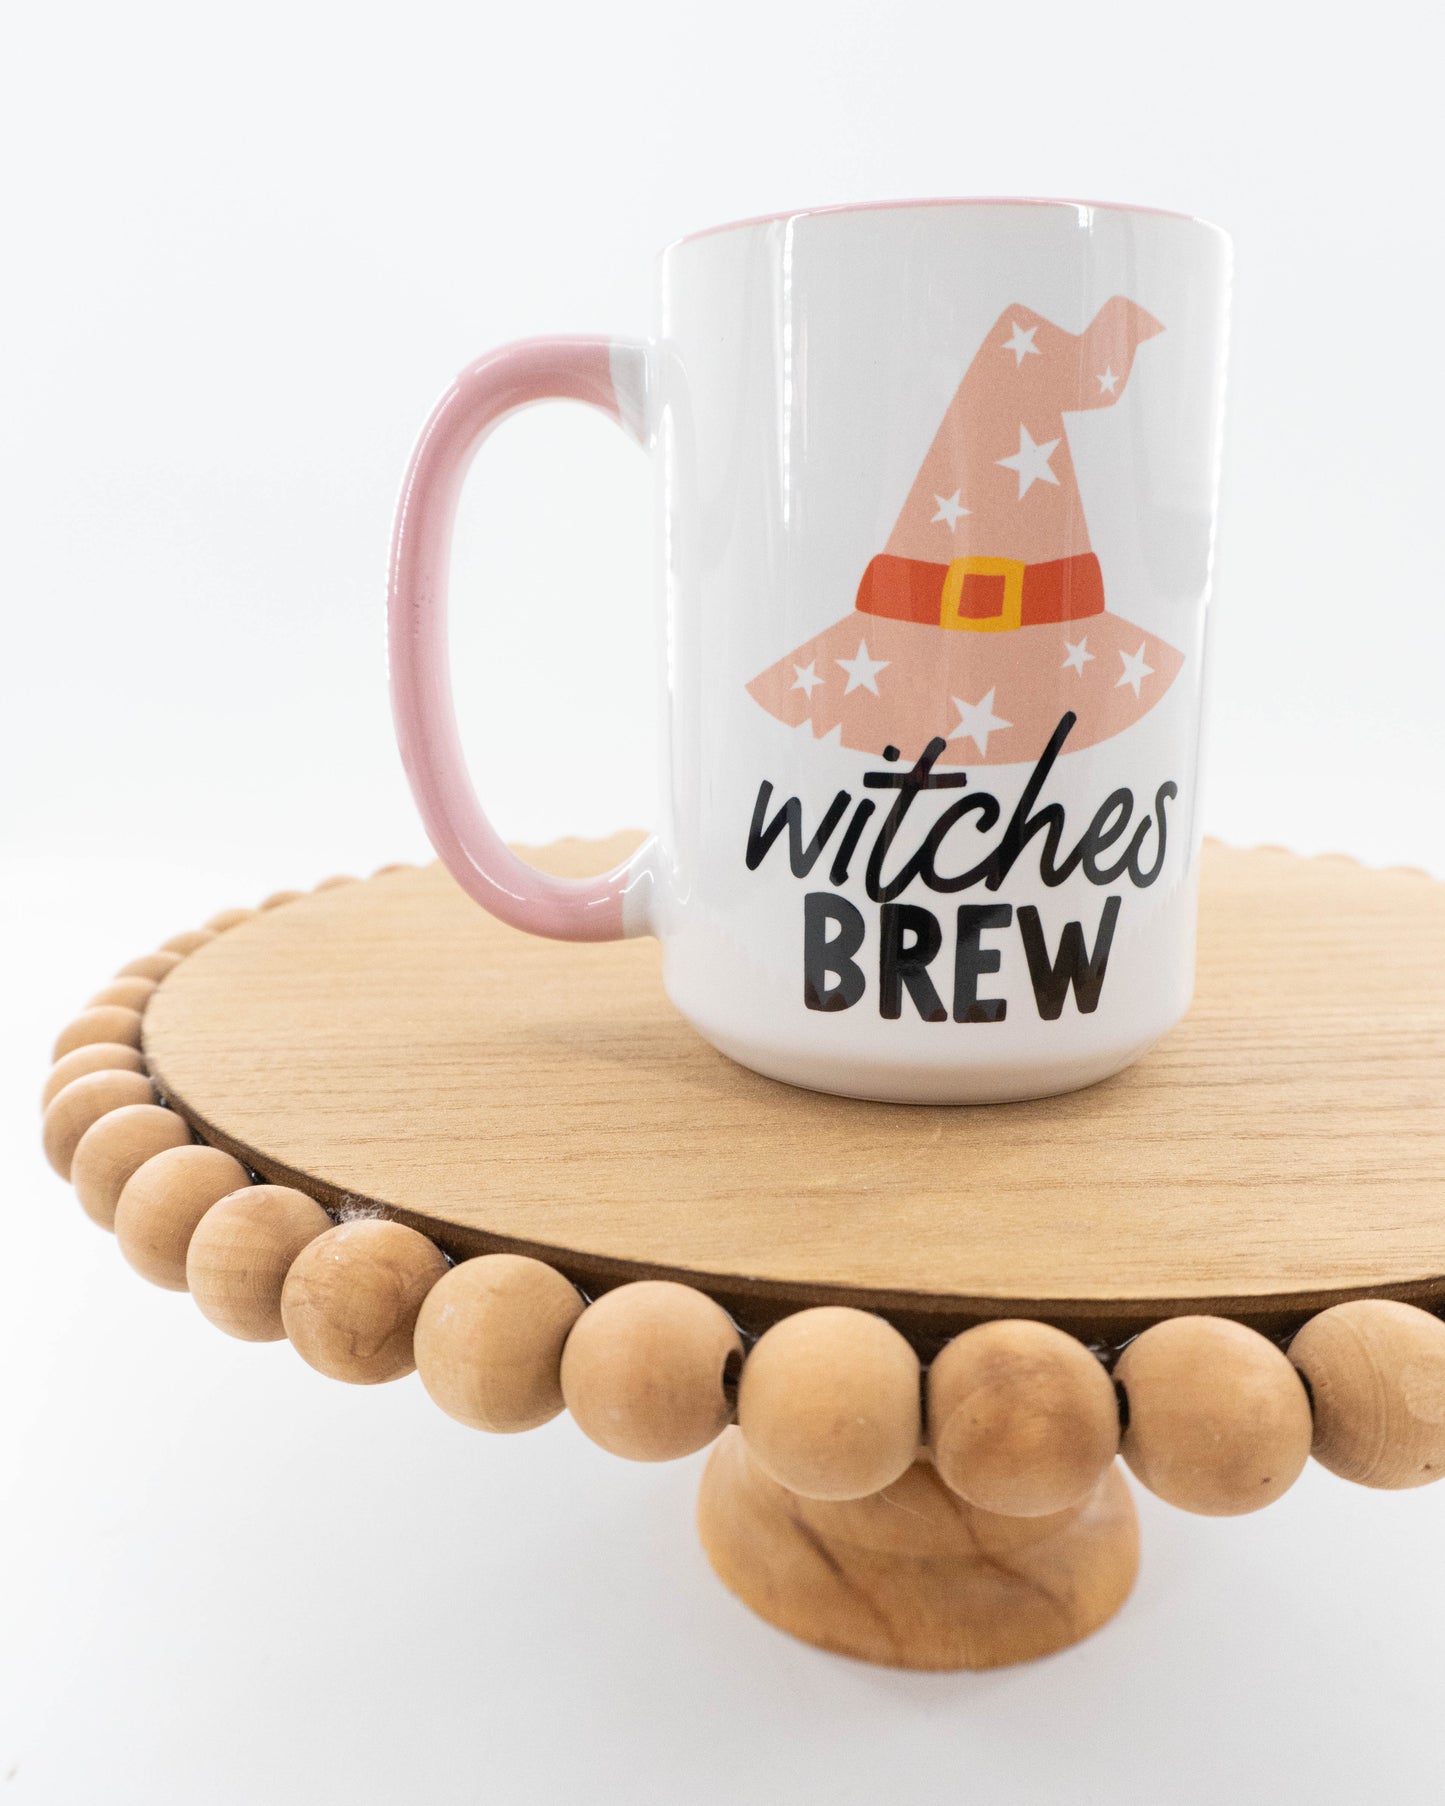 Witches Brew - Coffee Mug (Pink Handle & Inside)